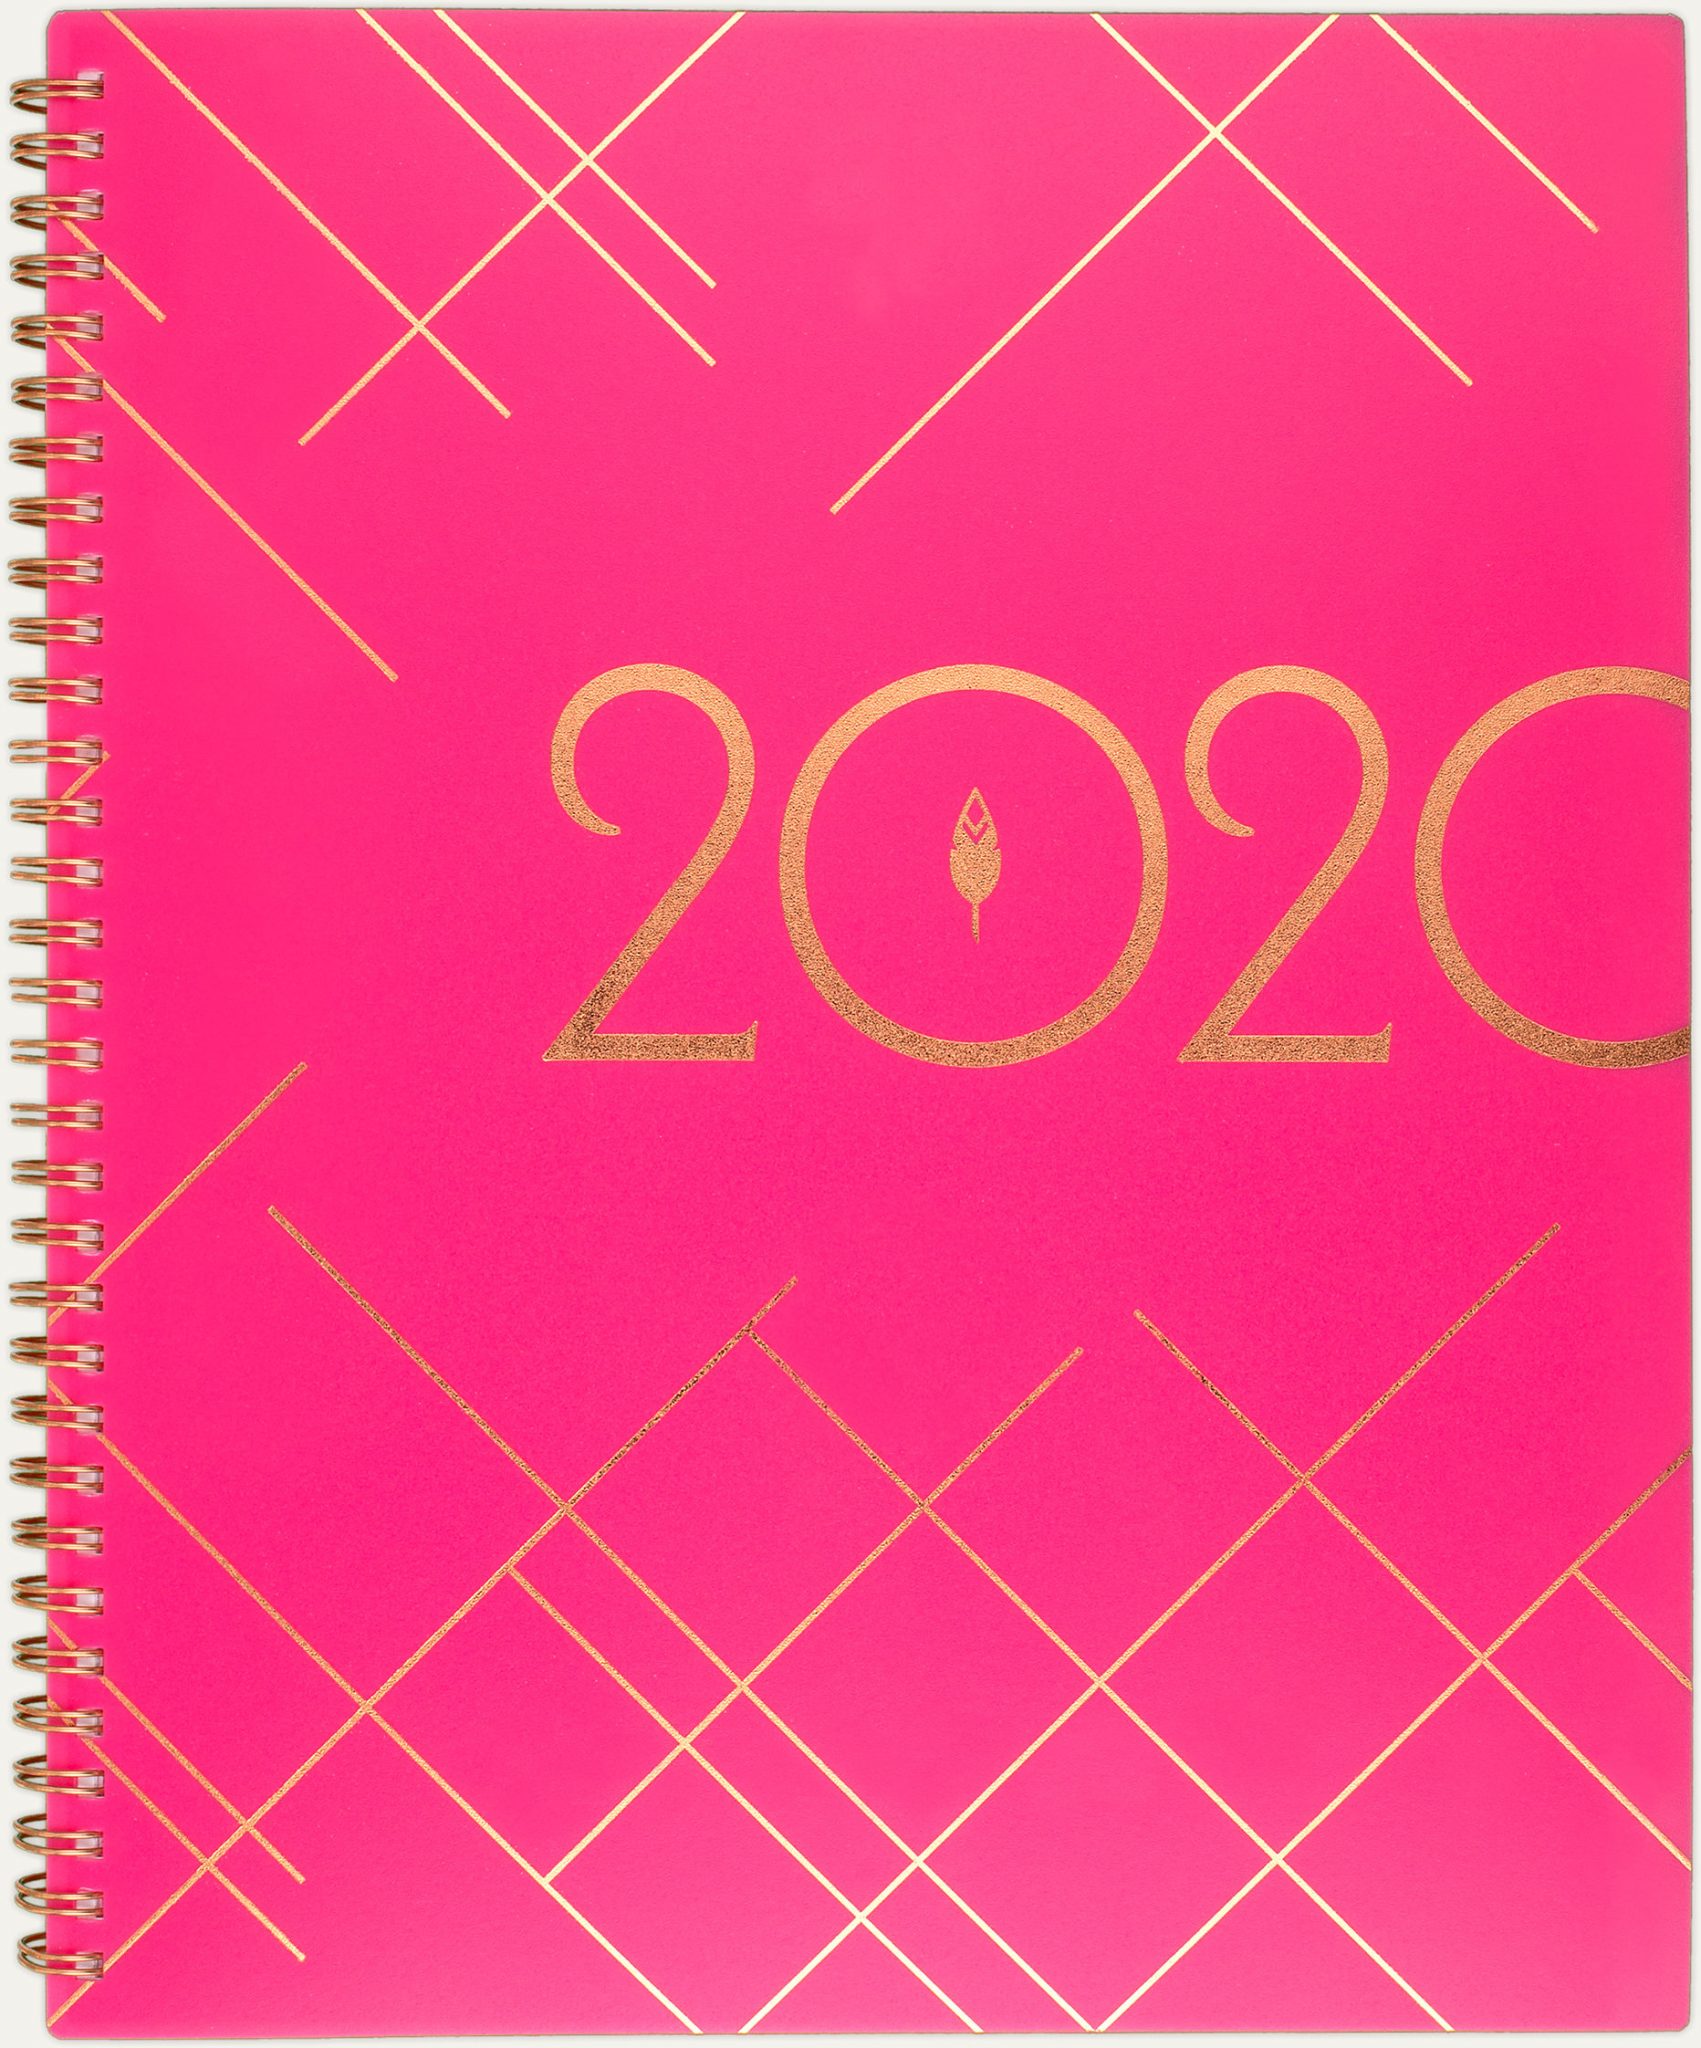 at-a-glance inkWELL 2020 new year planner